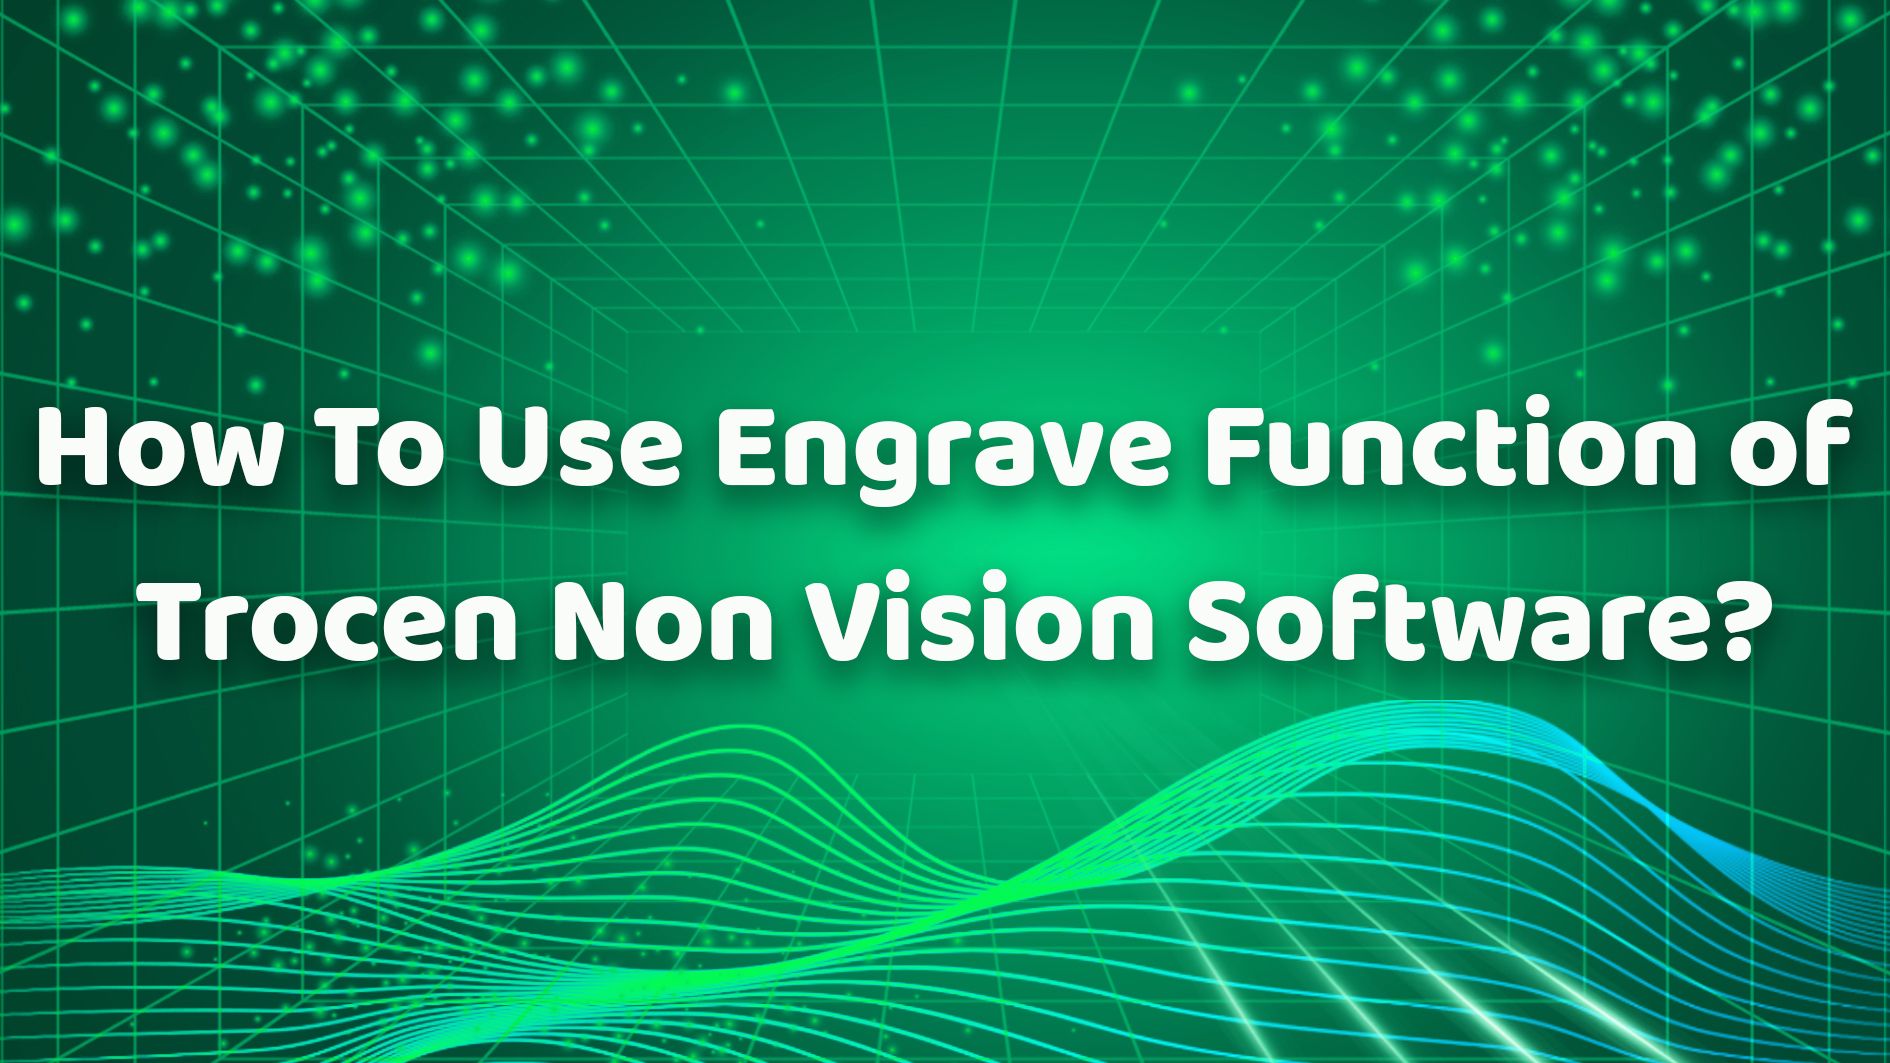 How To Use Engrave Function of Trocen Non Vision Software？